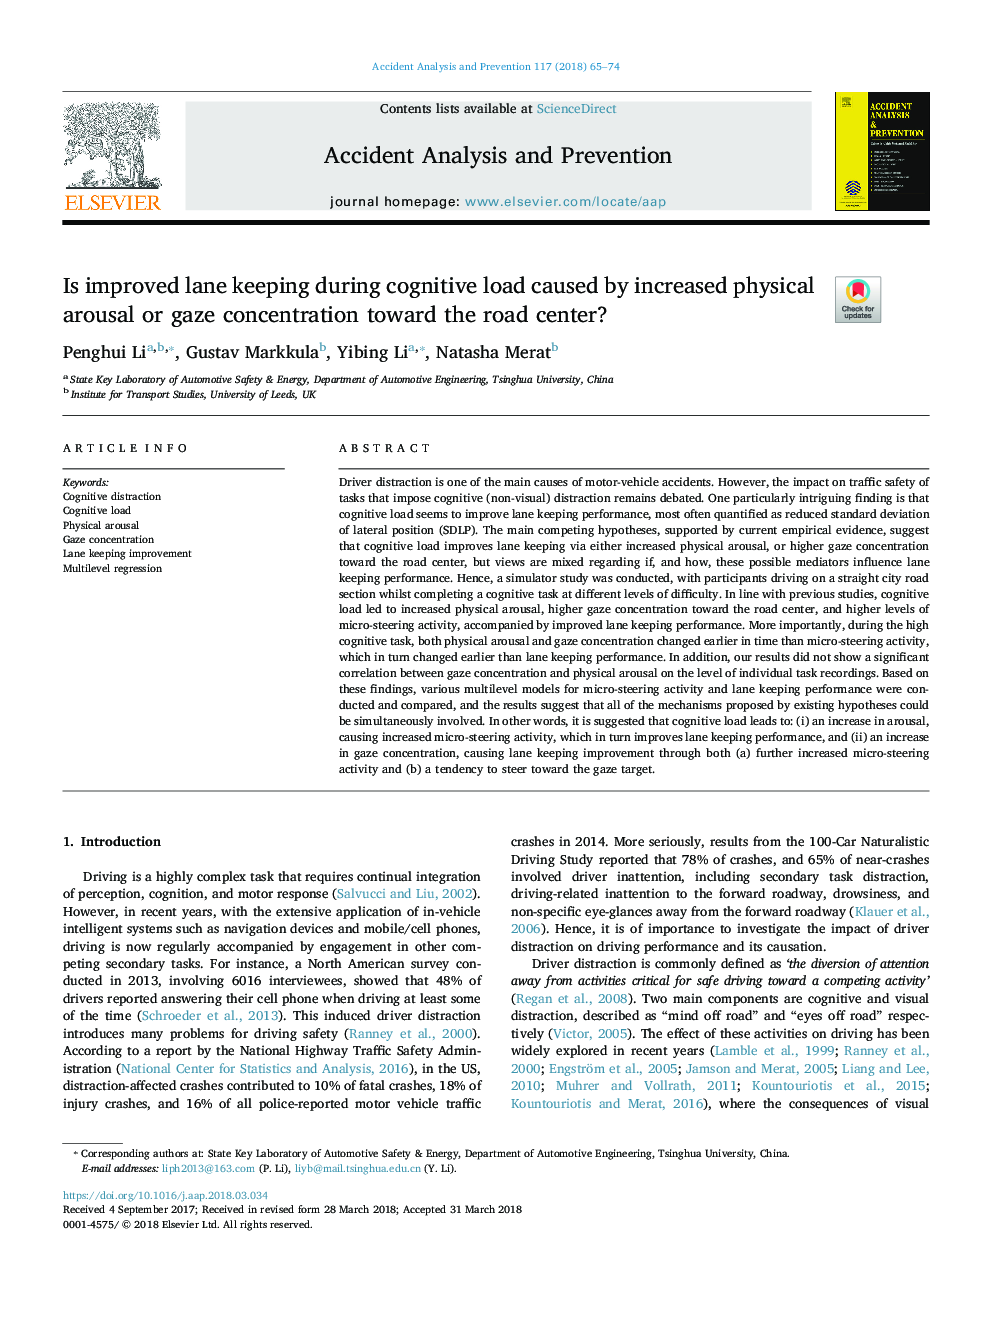 Is improved lane keeping during cognitive load caused by increased physical arousal or gaze concentration toward the road center?